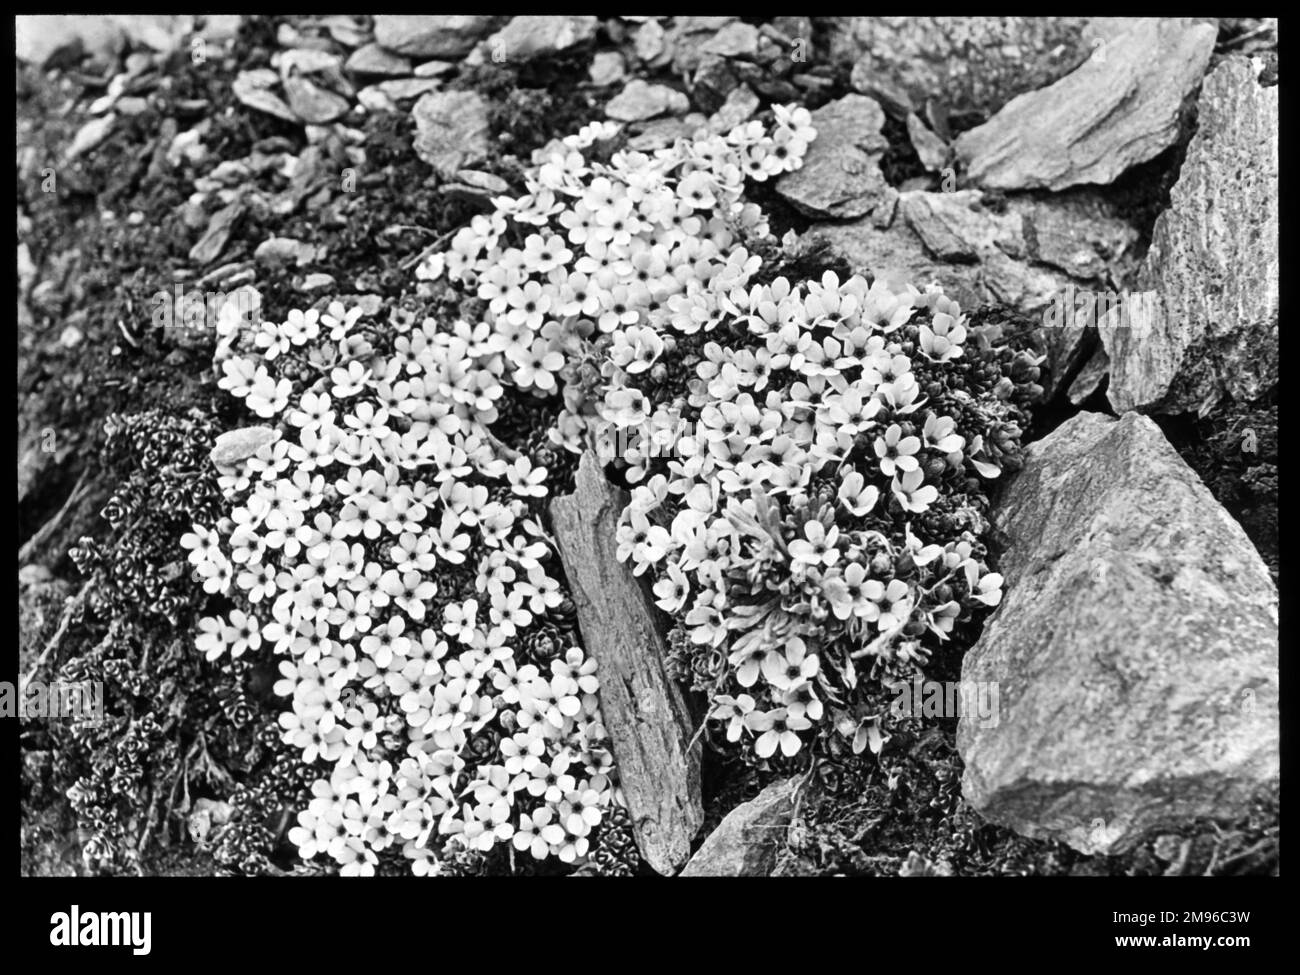 Androsace Glacialis, of the Primulaceae family, also known as rock jasmine or fairy candelabra.  They flourish in rock clefts on alpine summits, with pink flowers fading to white in the early spring. Stock Photo